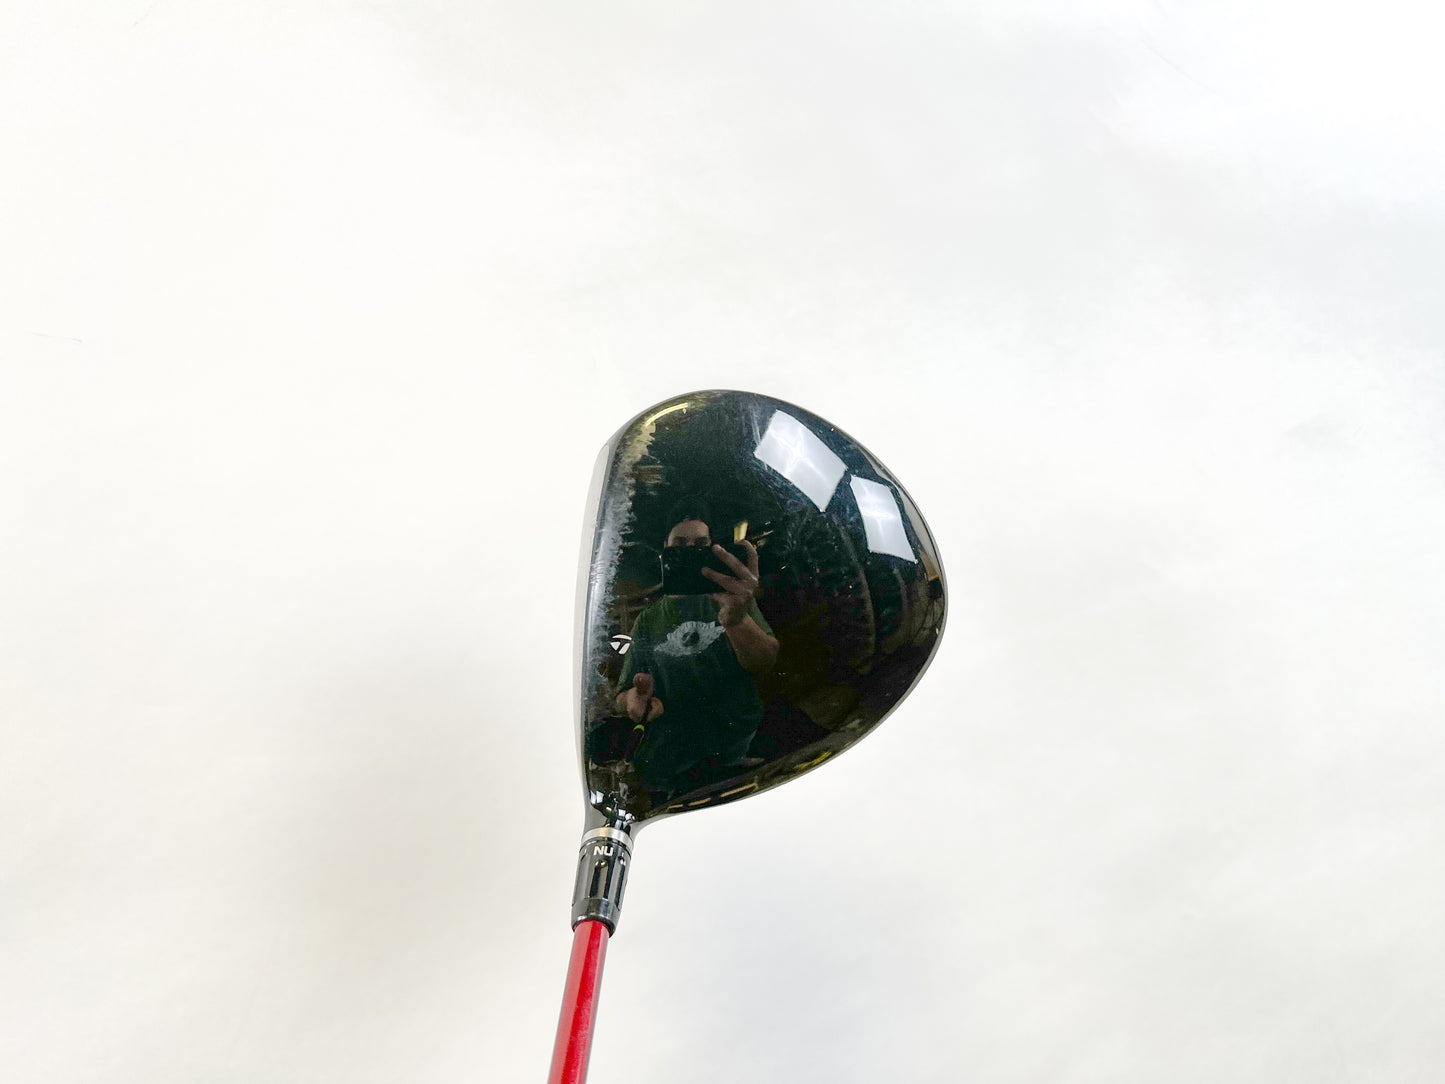 Used TaylorMade R9 Driver - Right-Handed - 10.5 Degrees - Stiff Flex-Next Round